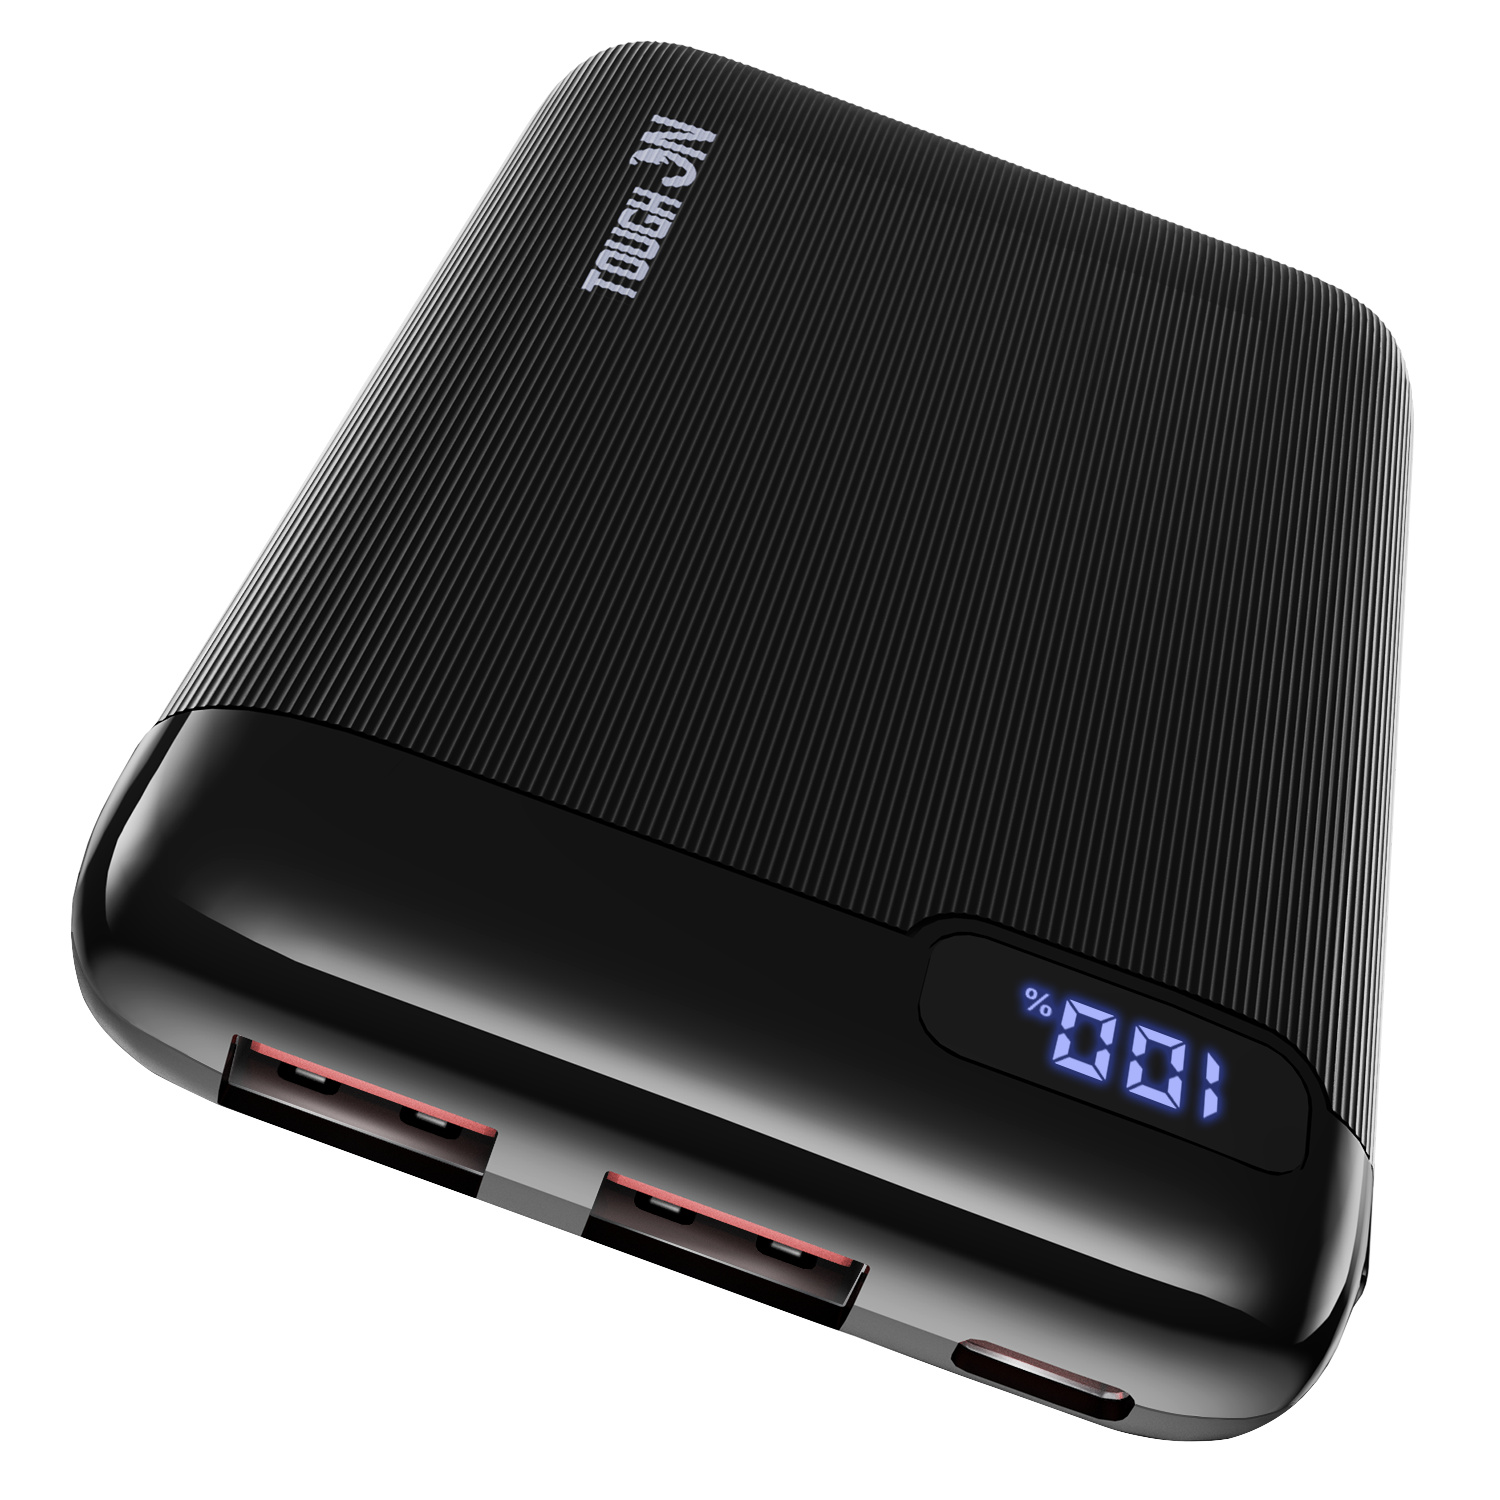 Tough on Portable Power Bank 5000mAh Fast Charger